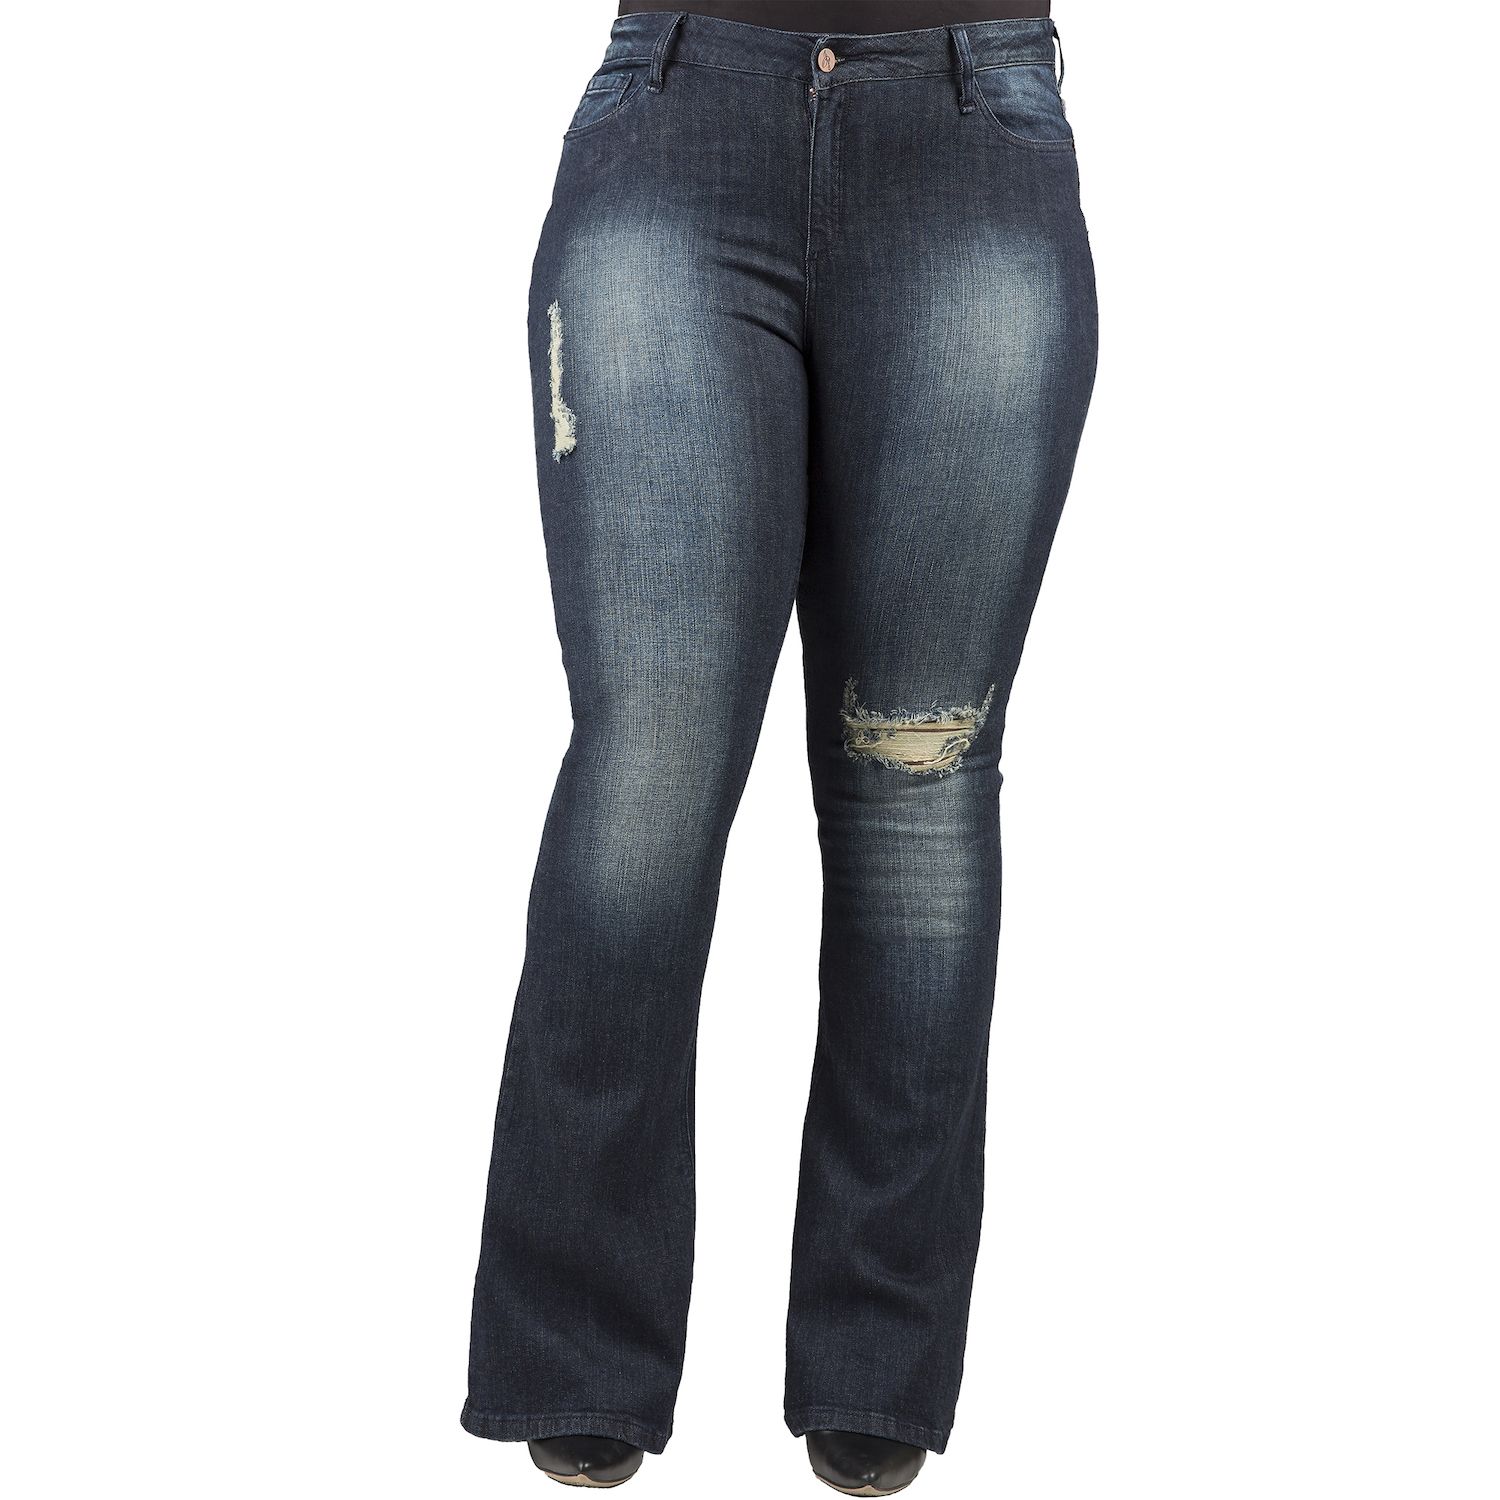 Kohls Cropped Jeans Sale Prices